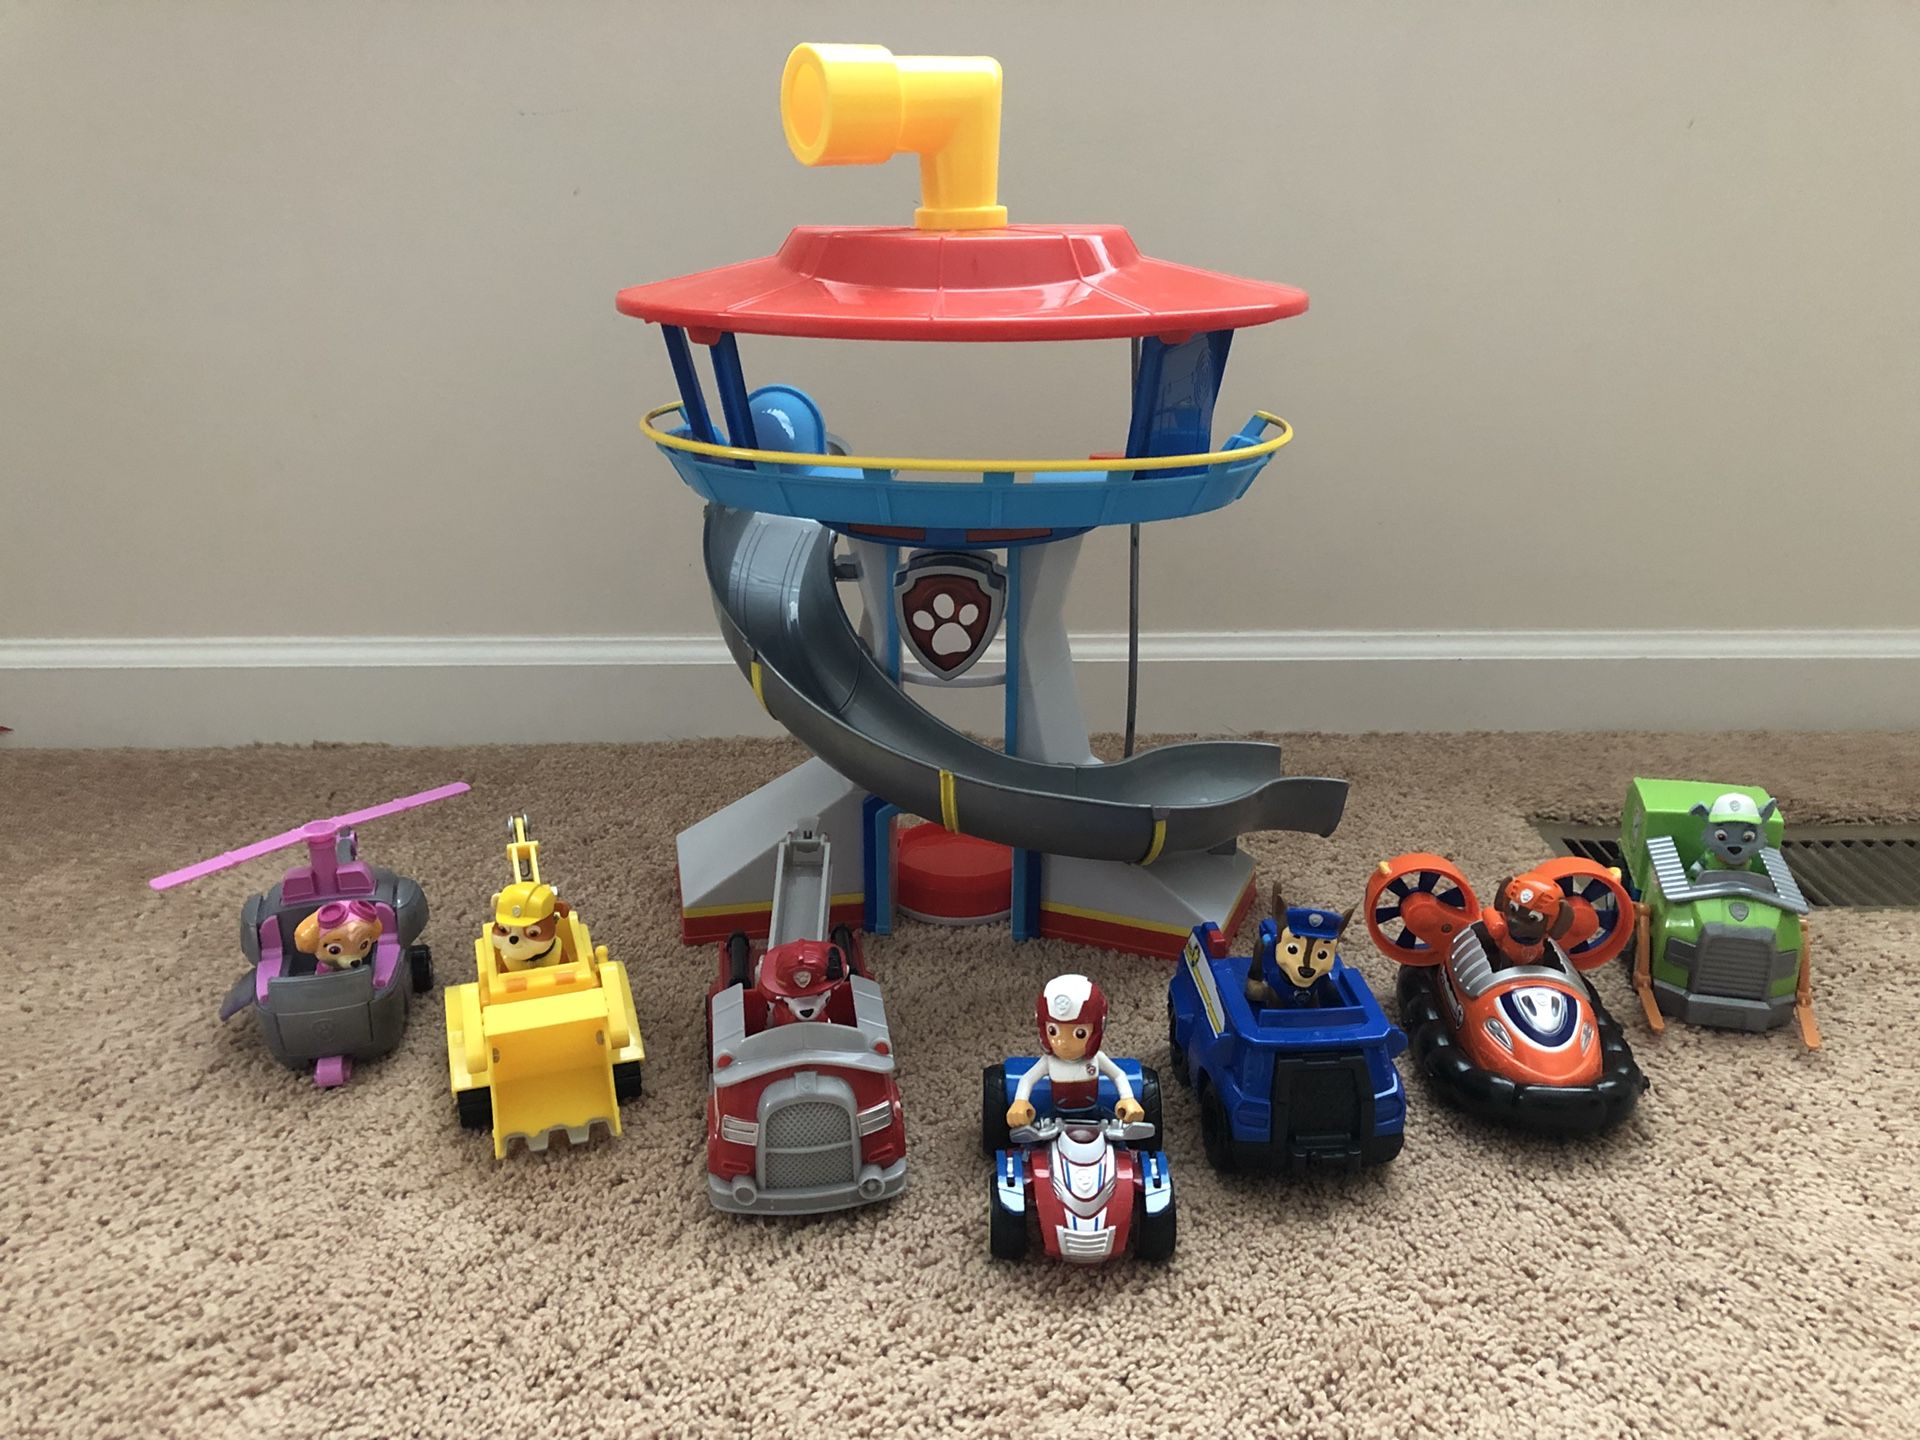 Paw Patrol Toys - complete set and look out tower